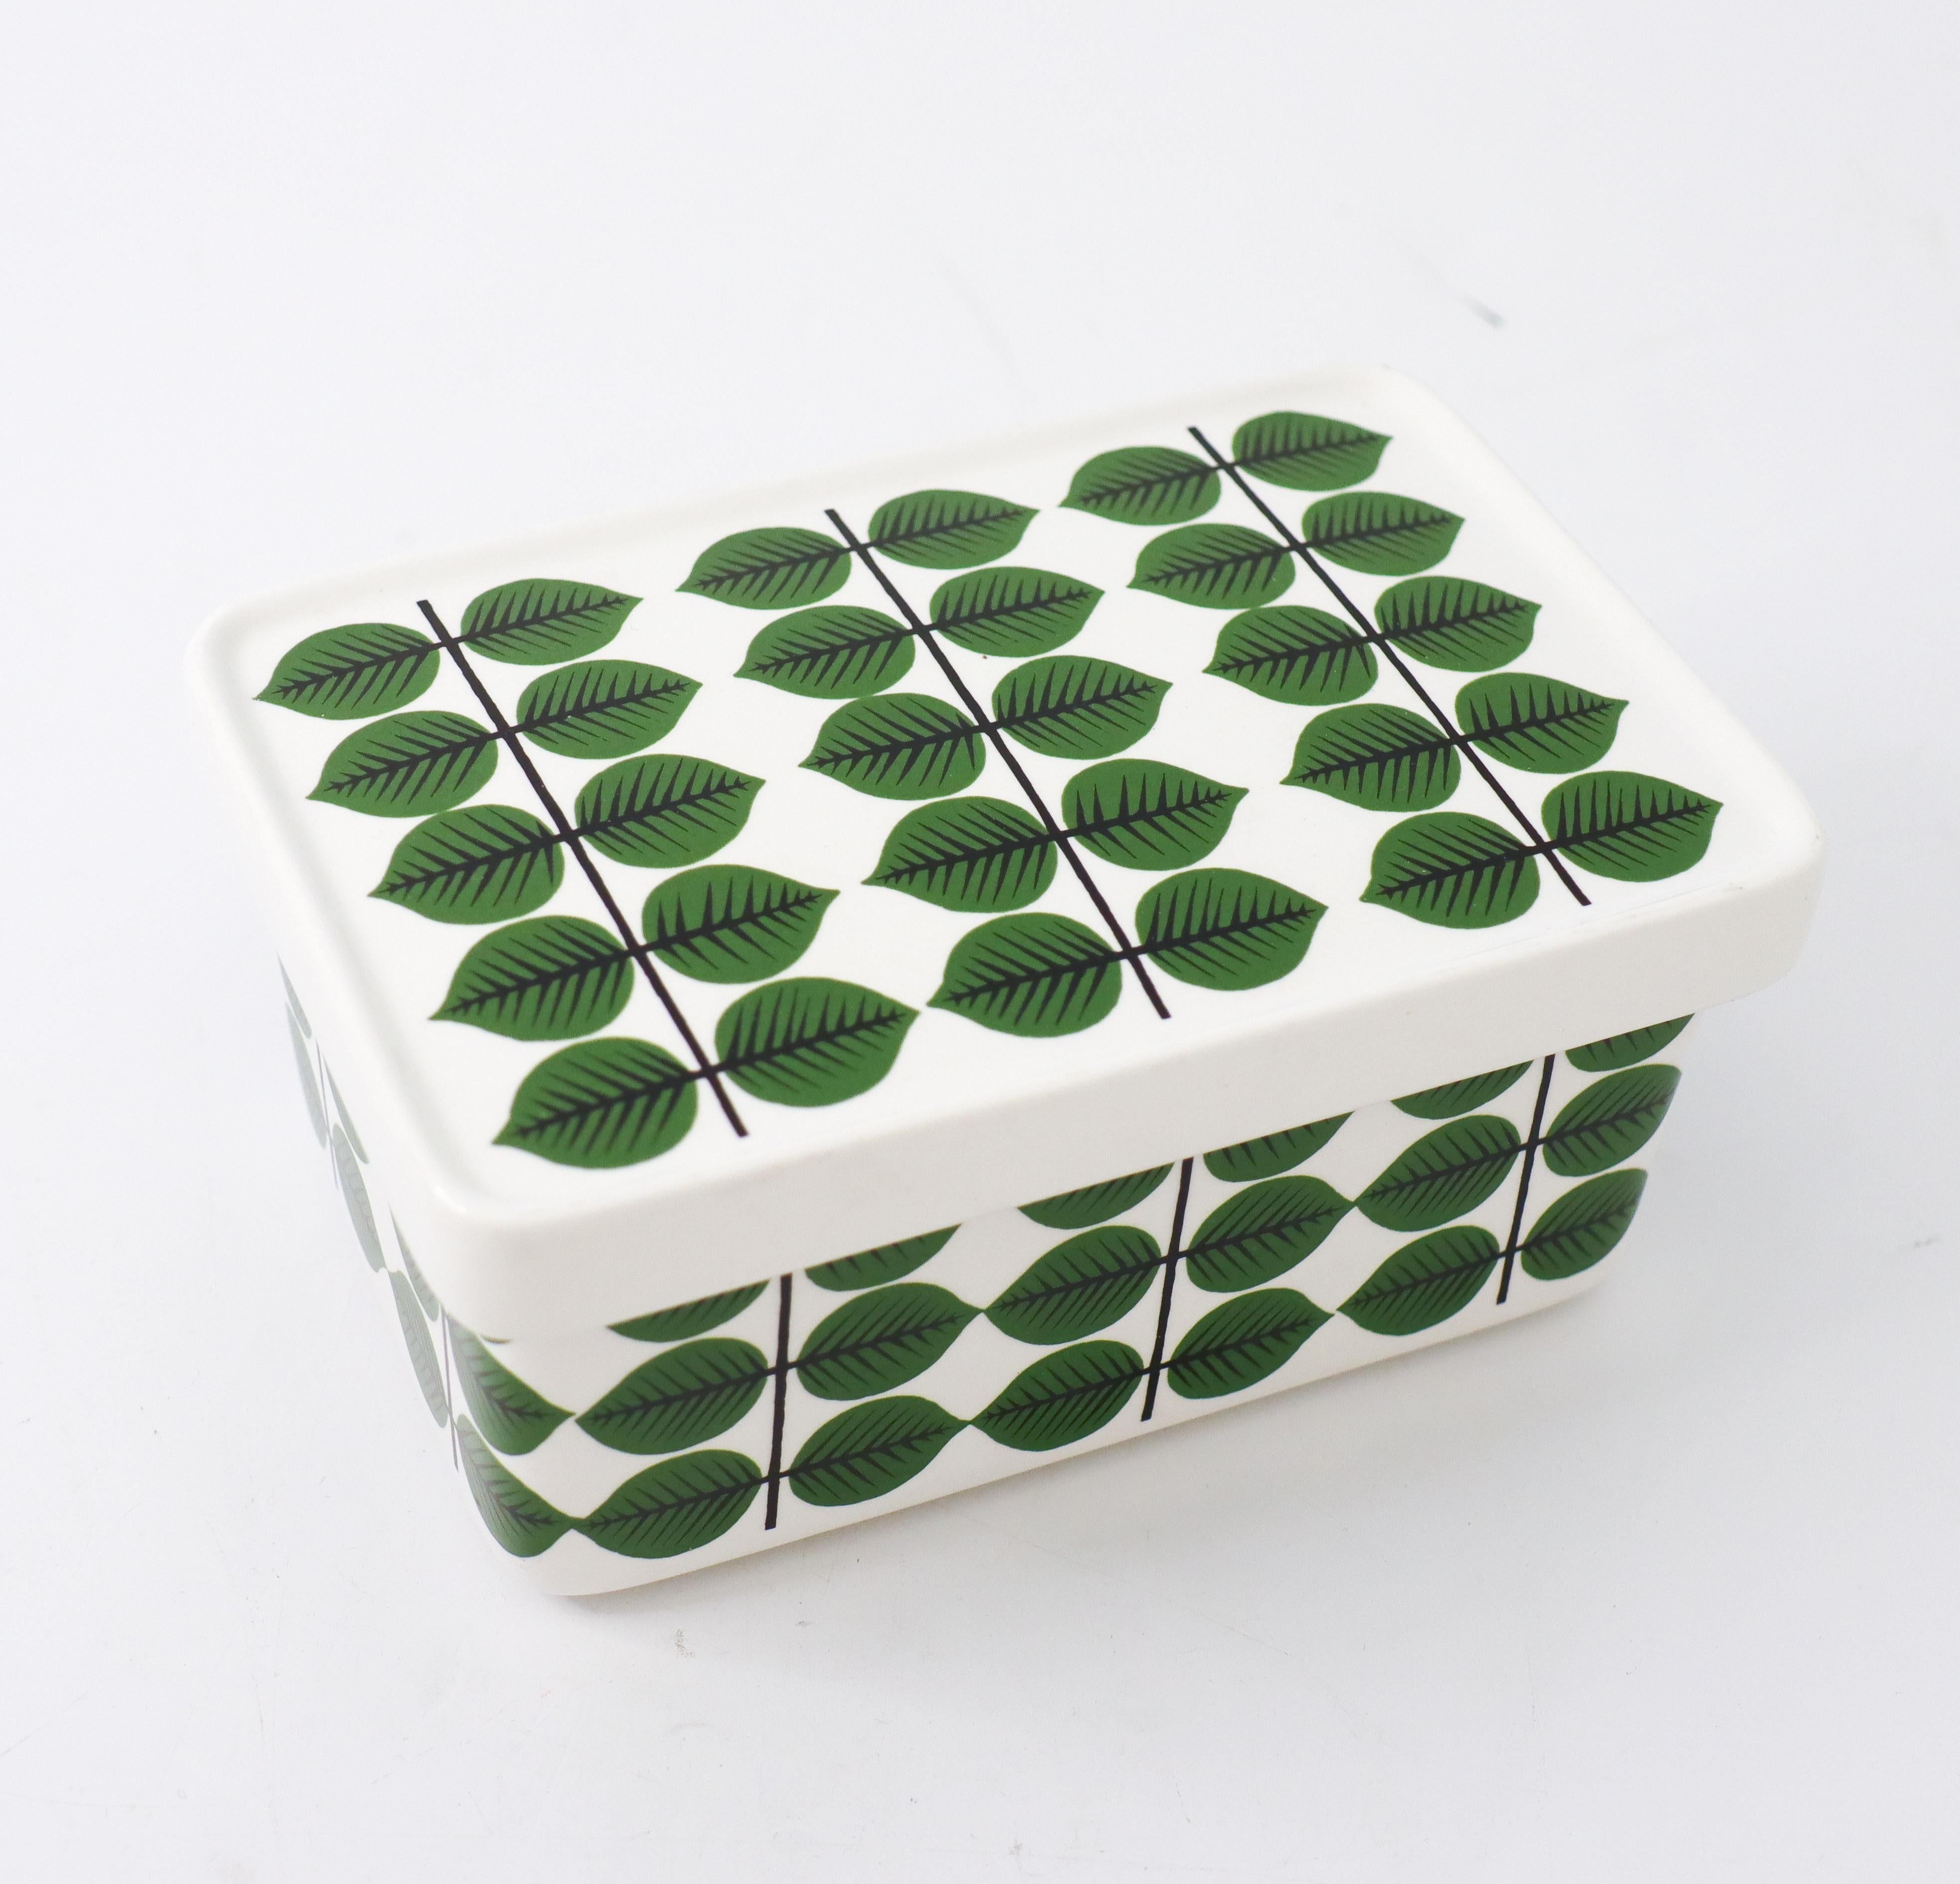 A lidded box in porcelain in the very famous pattern Berså designed by Stig Lindberg at Gustavsberg. This was original made as a butter dish but can be used as a box as well. It is 16.5 x 11 cm in diameter and 6 cm high. It is in mint